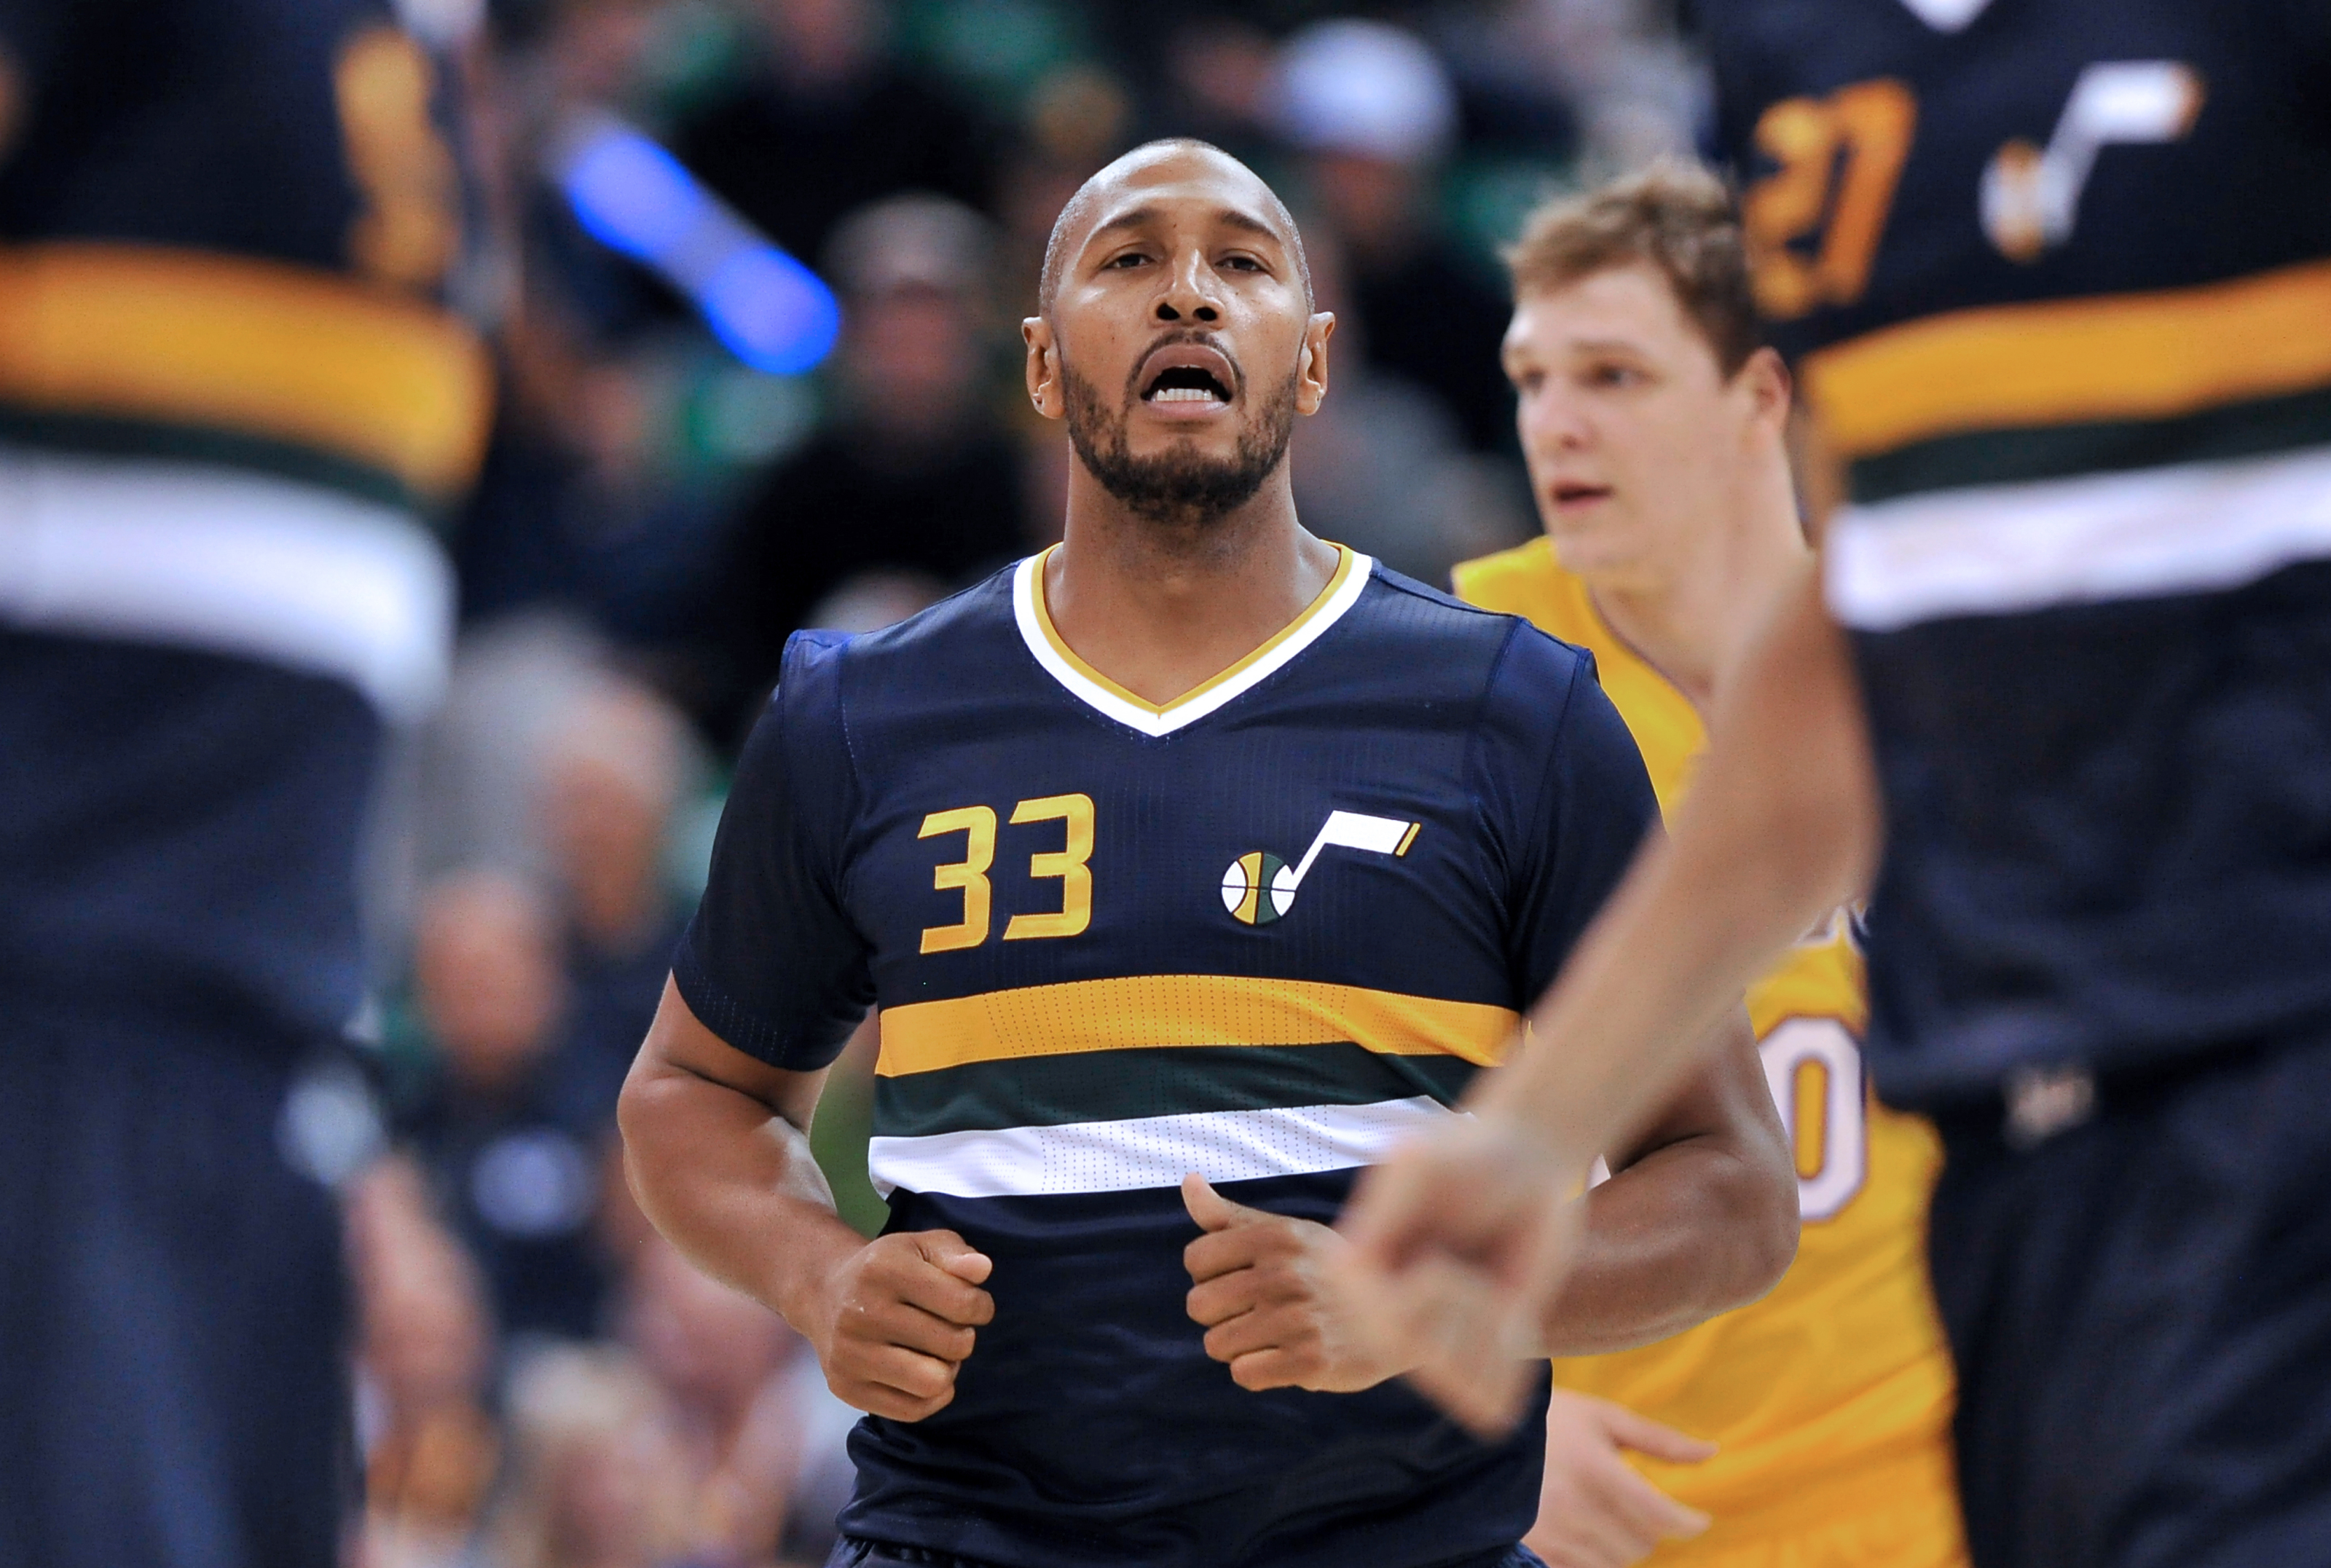 Utah Jazz: It's time to bring back the short-sleeved jerseys